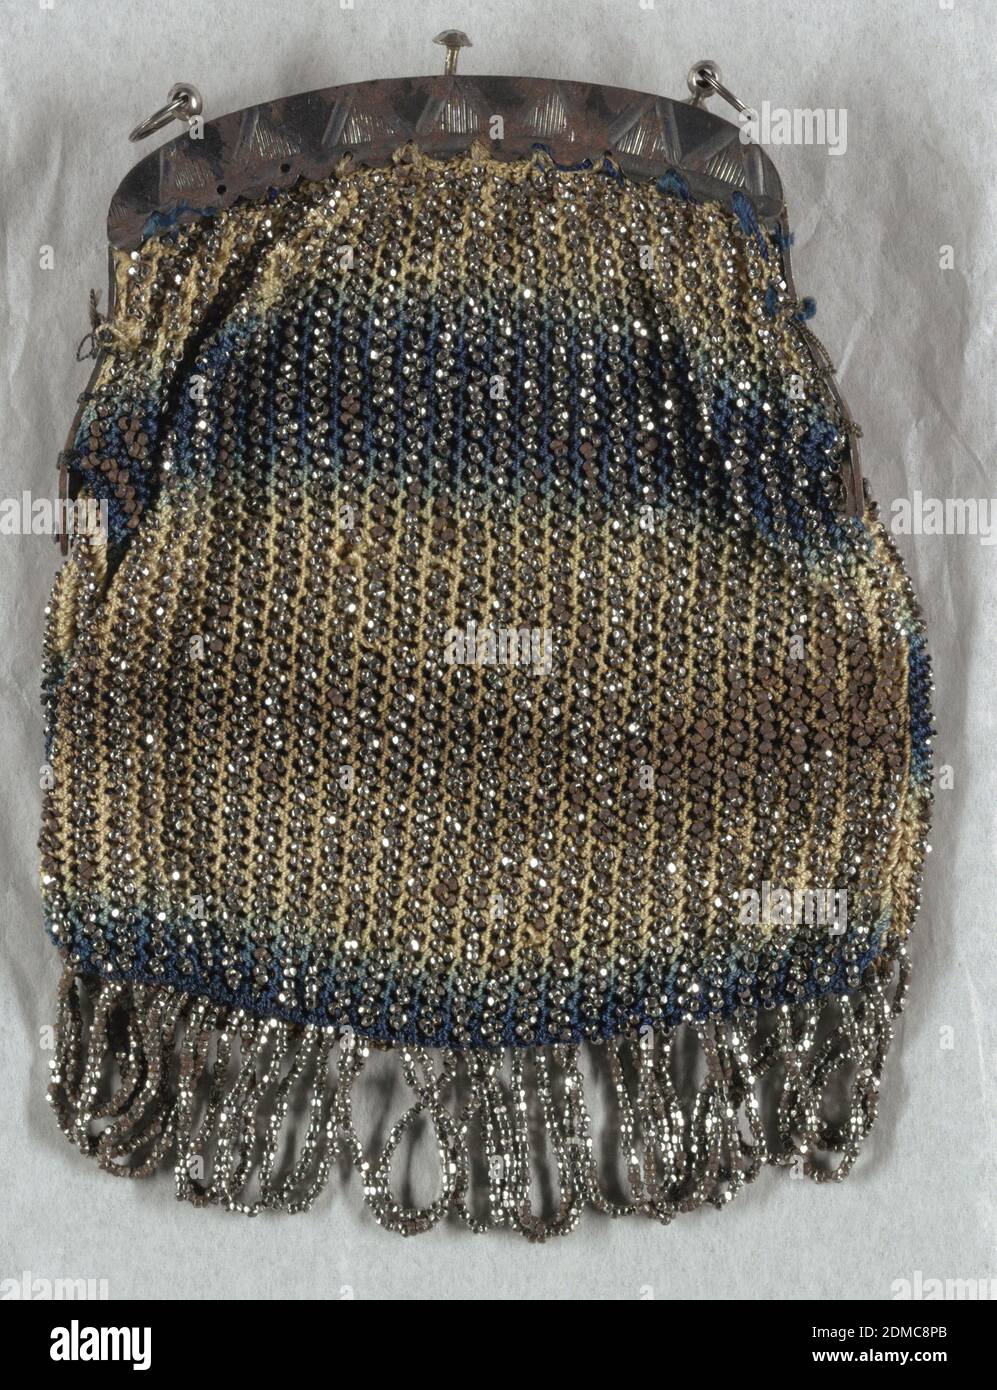 Purse, Medium: silk, steel beads, steel frame Technique: crochet with beadwork, Ladies' purse worked in crochet in blue and tan silk with vertical stripes of steel beads and looped fringe at the bottom. Steel frame for opening., USA, mid-19th century, costume & accessories, Purse Stock Photo